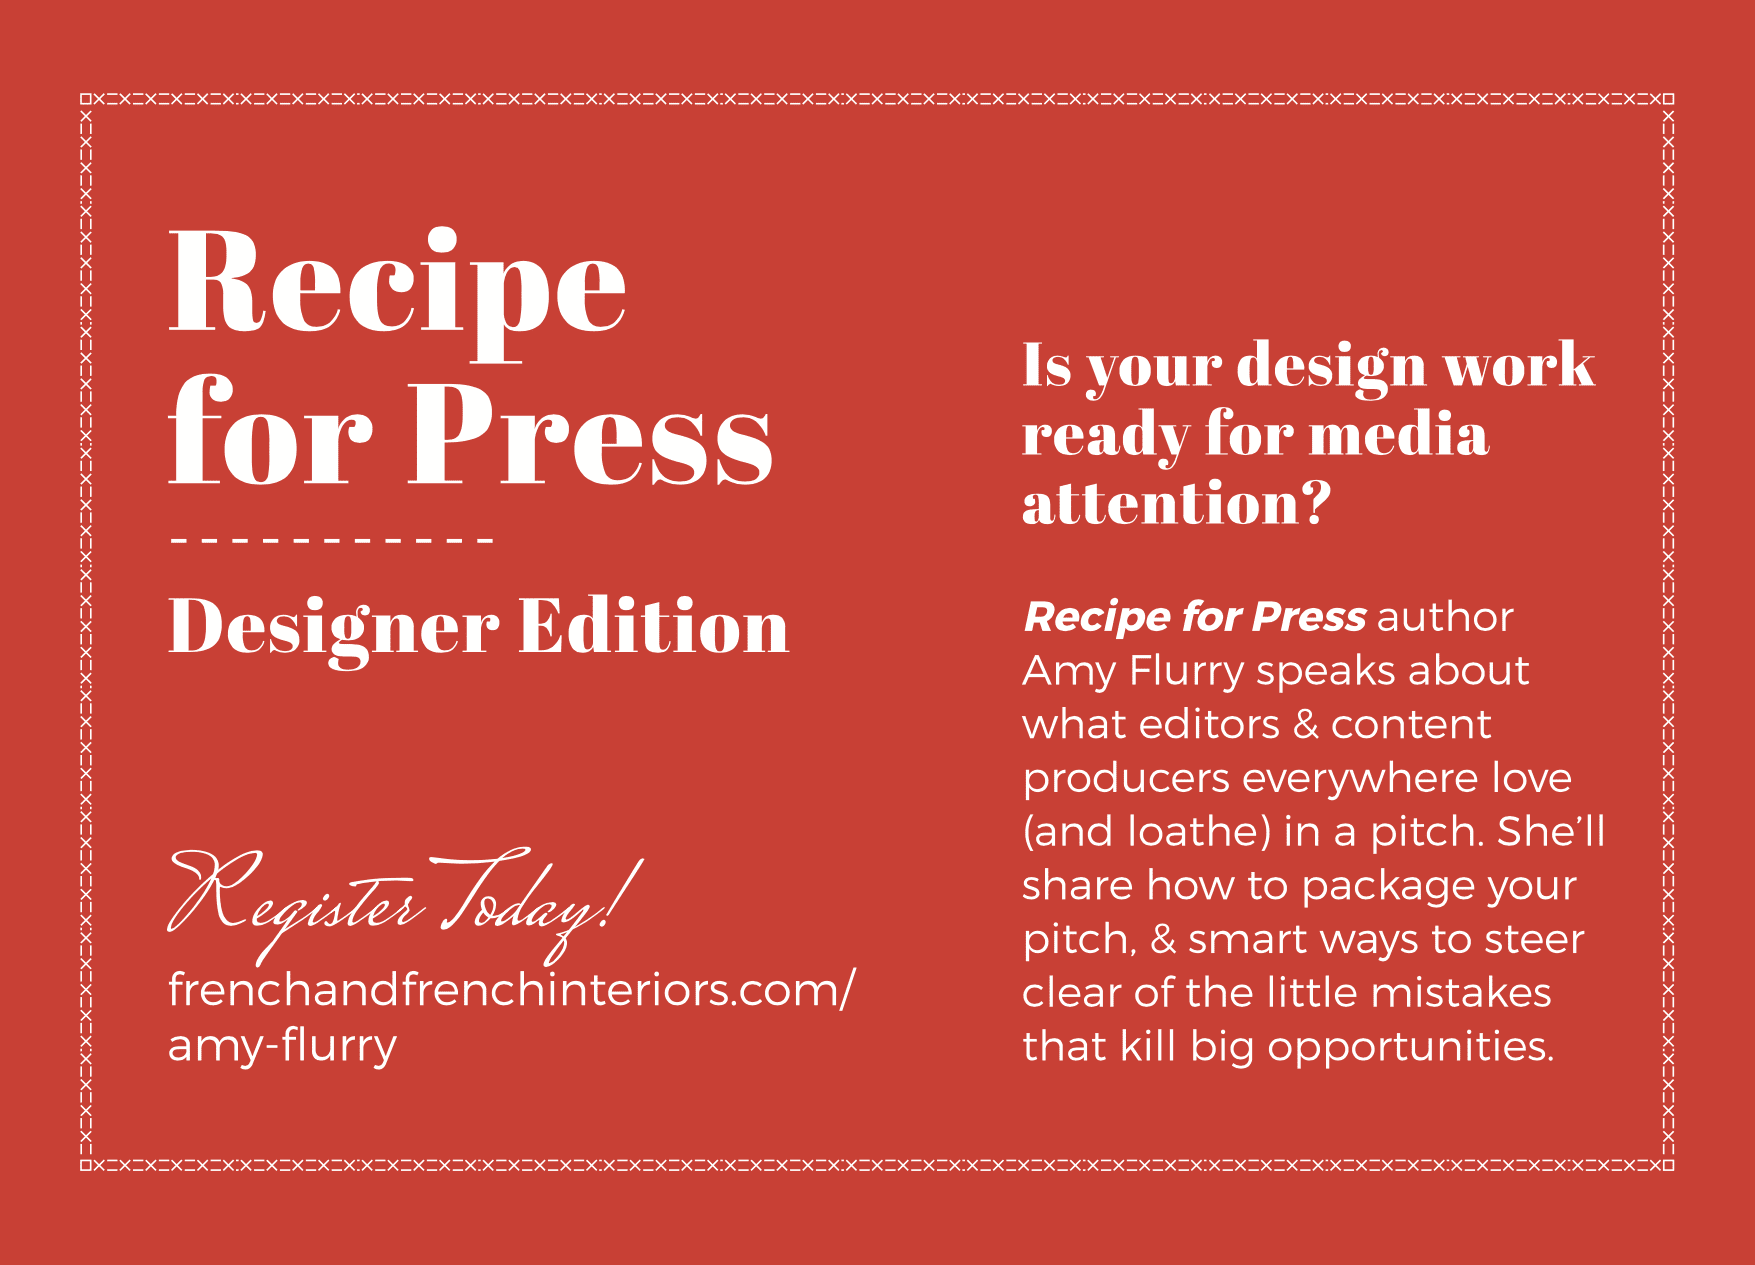 Event postcard for Amy Flurry's Recipe for Press speaking event